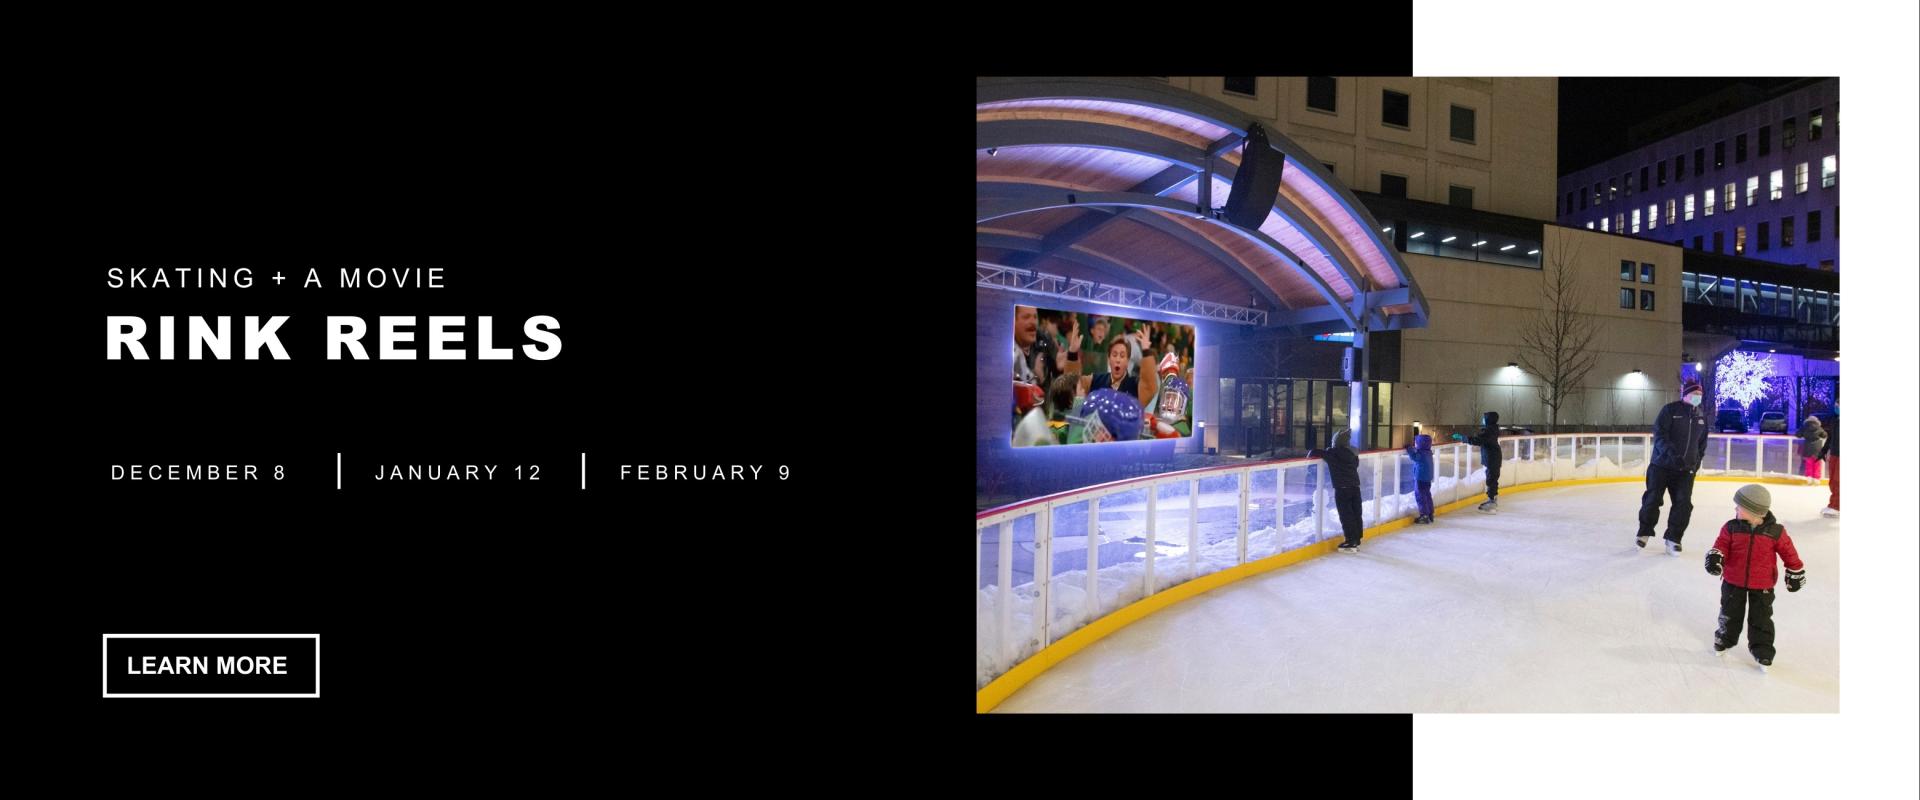 This graphic shows people enjoying skating and a movie at Broadway Square with the Rink reels date and learn more button